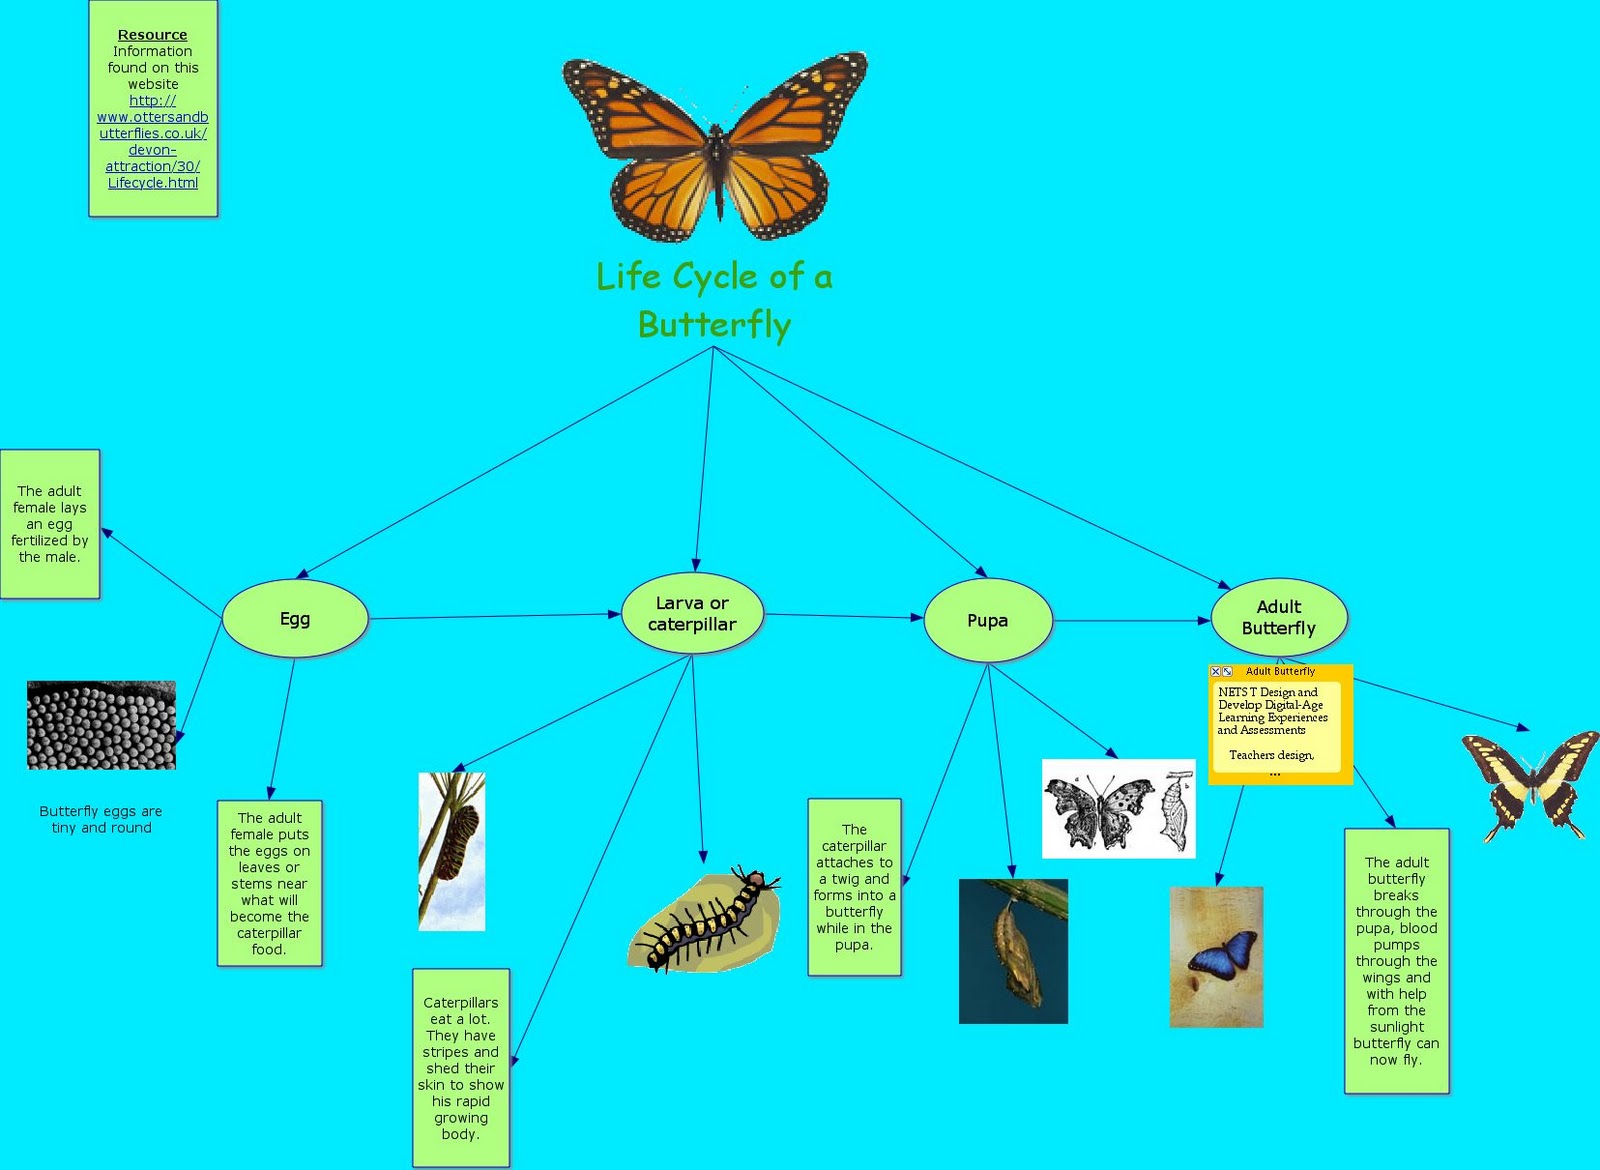 my-experience-in-486-inspiration-software-life-cycle-of-a-butterfly